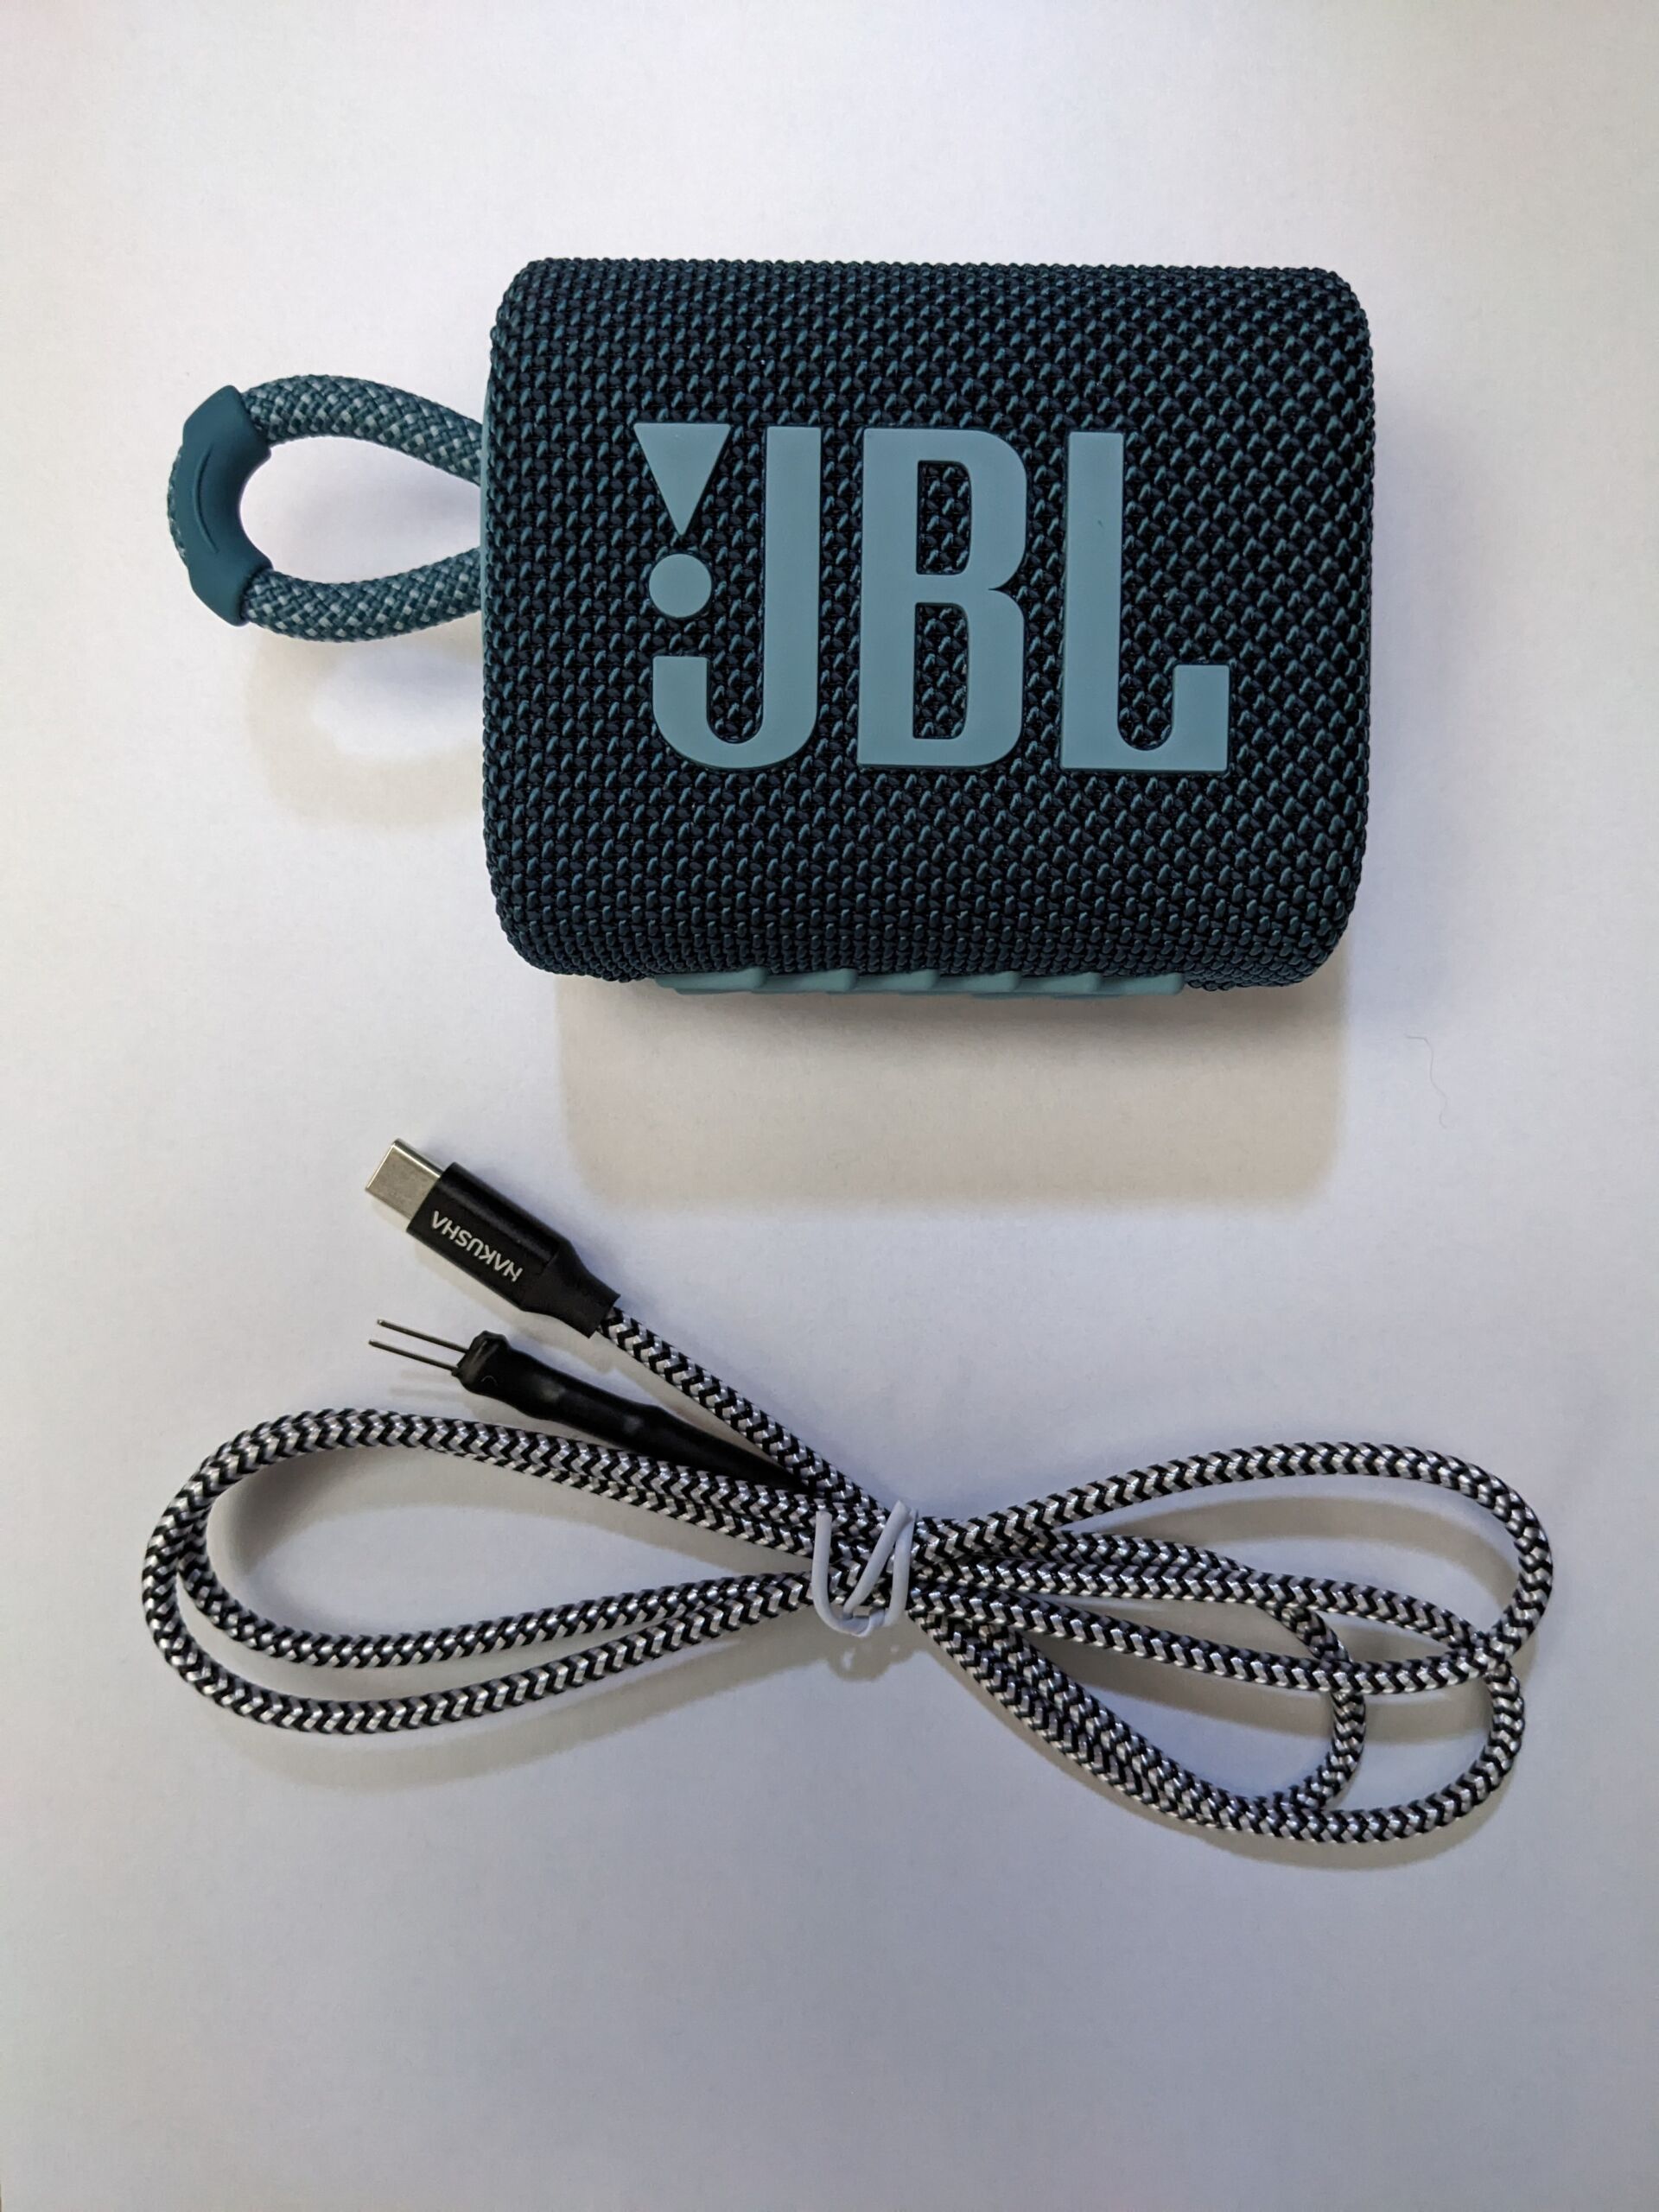 The CAN injector disguised as a JBL speaker.